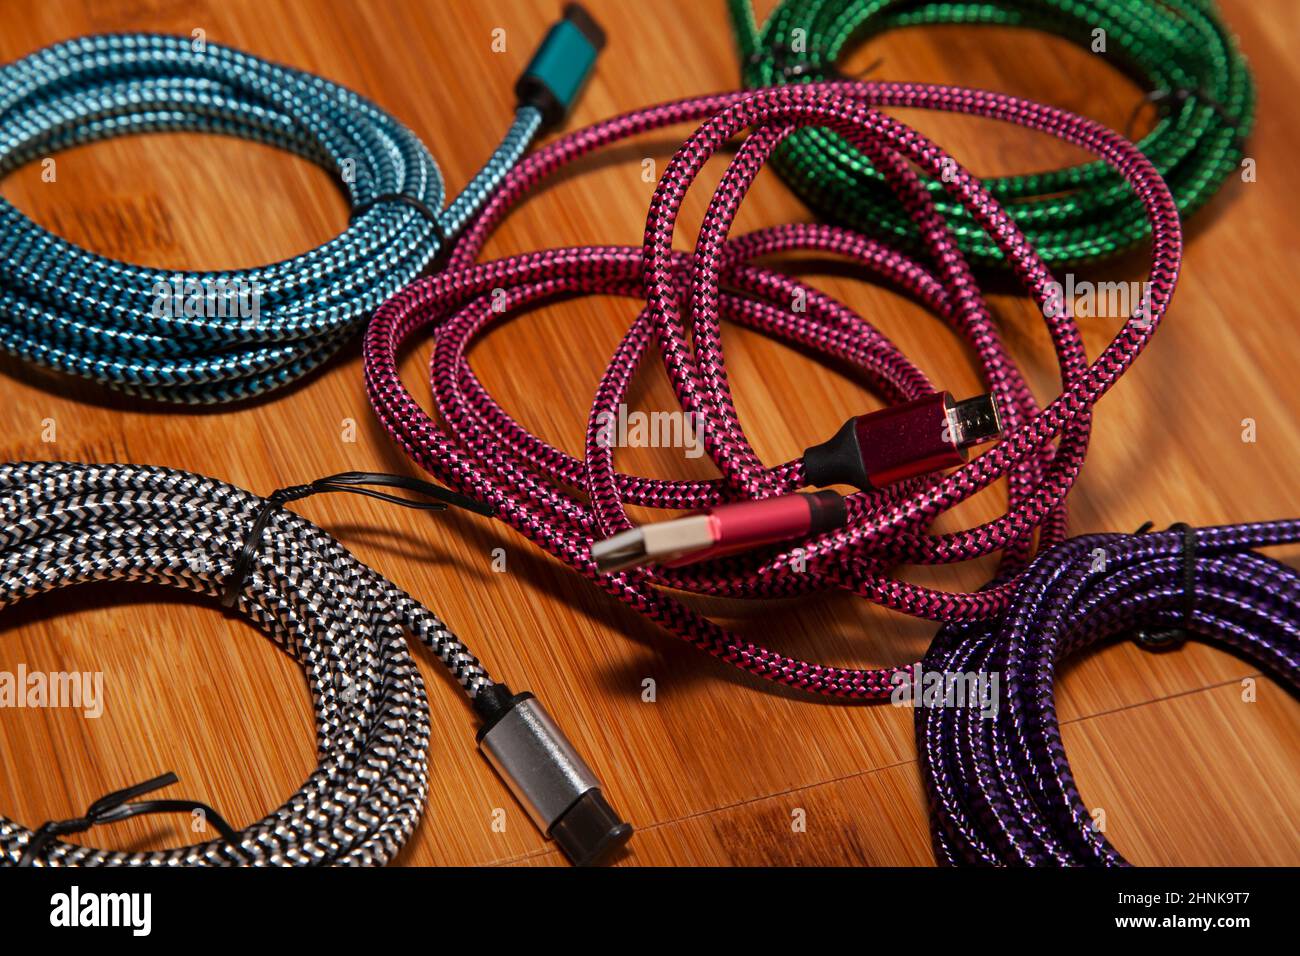 Multicolored Charging Cords Stock Photo